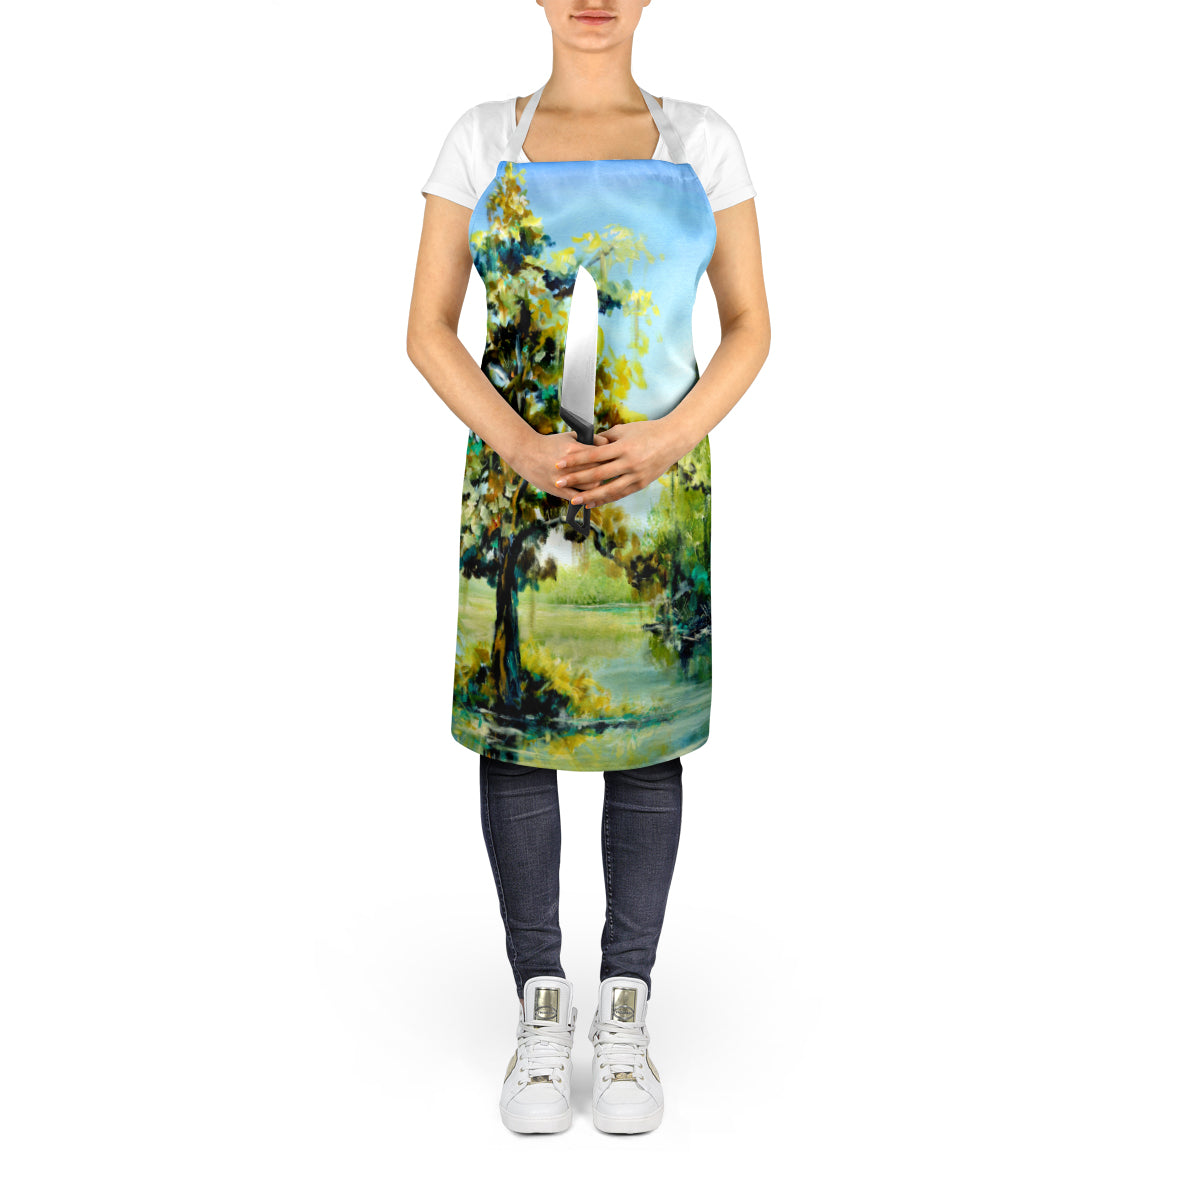 Cypress Tree in the Bayou Blue Apron